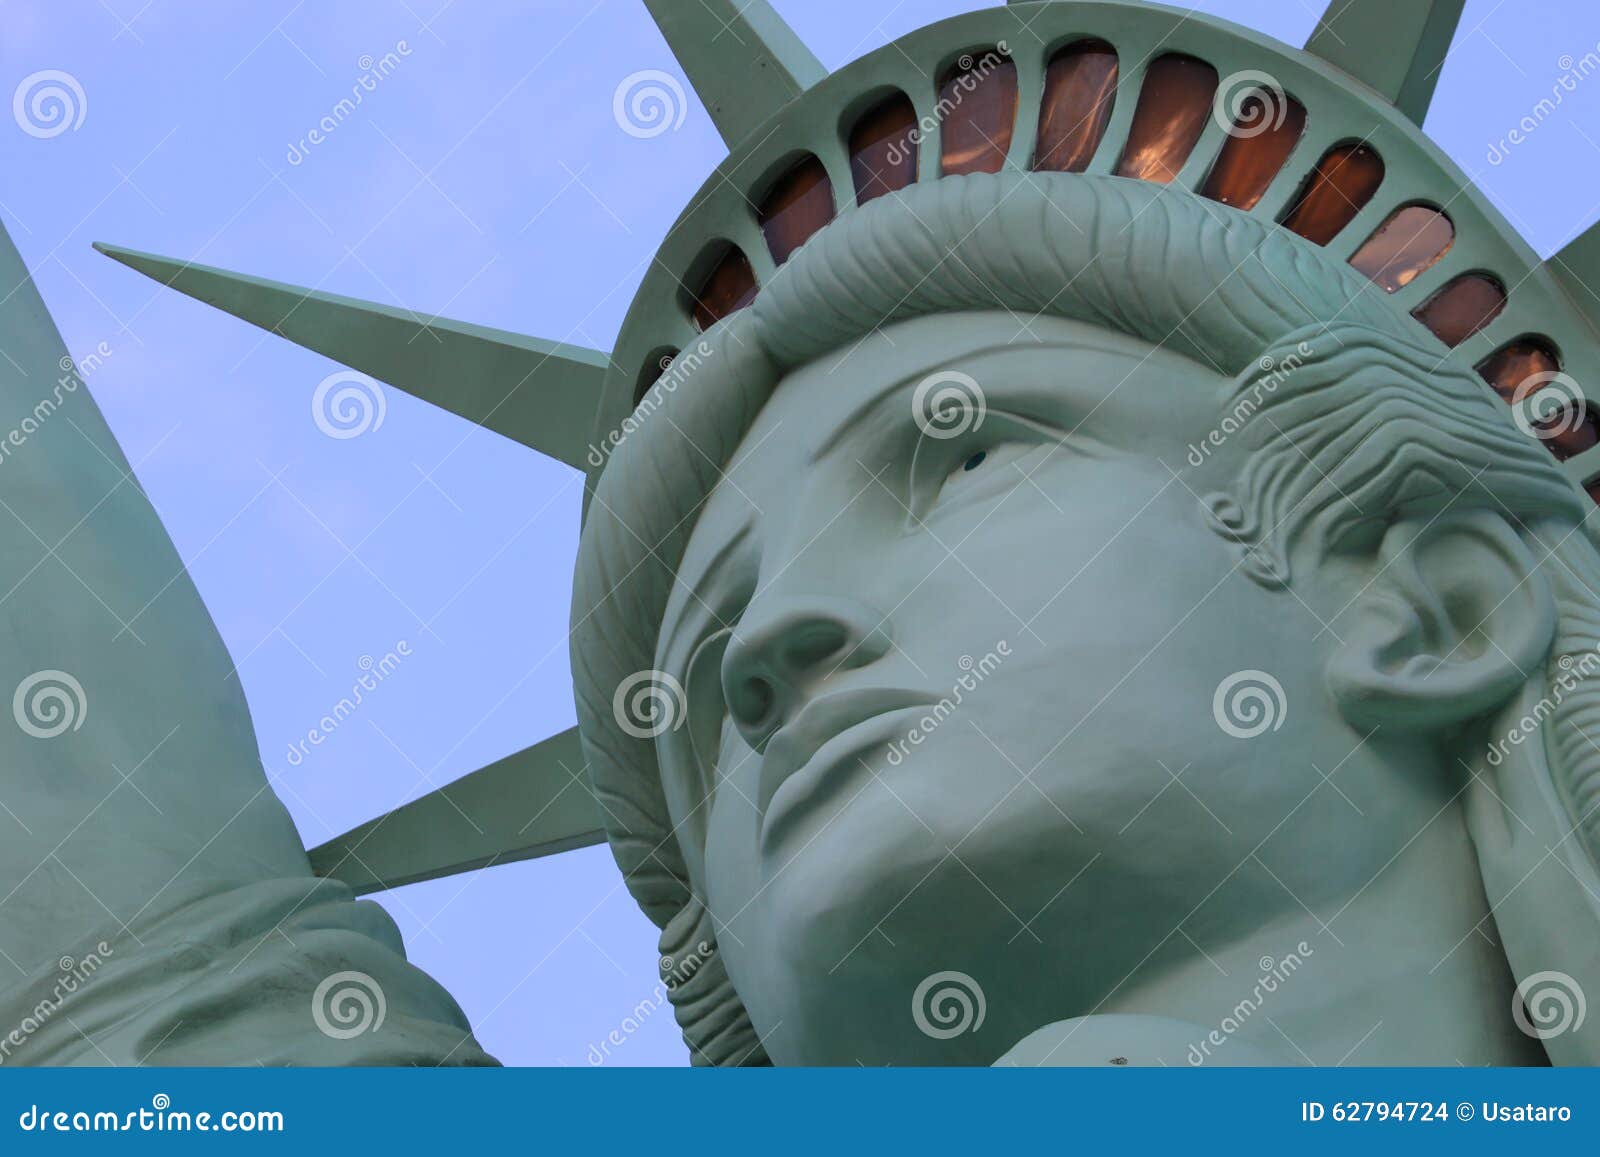 the statue of liberty is a colossal copper statue ed by auguste bartholdi a french sculptor was built by gustave eiffel 